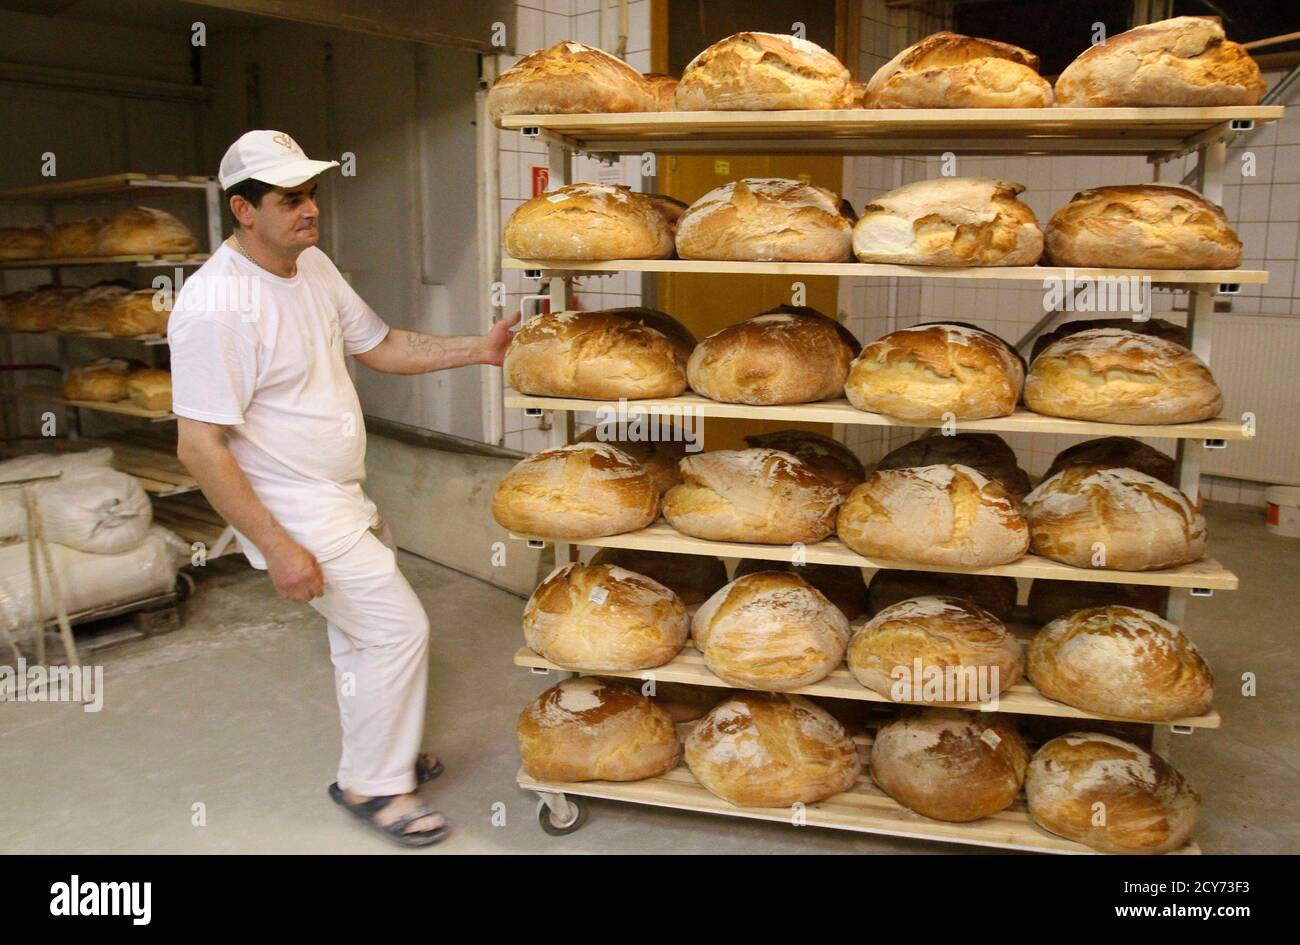 A Baker Pulls A Trolley Loaded With Freshly Baked Bread In The Lipoti Bakery In Budapest November 3 2011 The Lipoti Bakery Started As A Small Family Venture In 1992 In Lipot